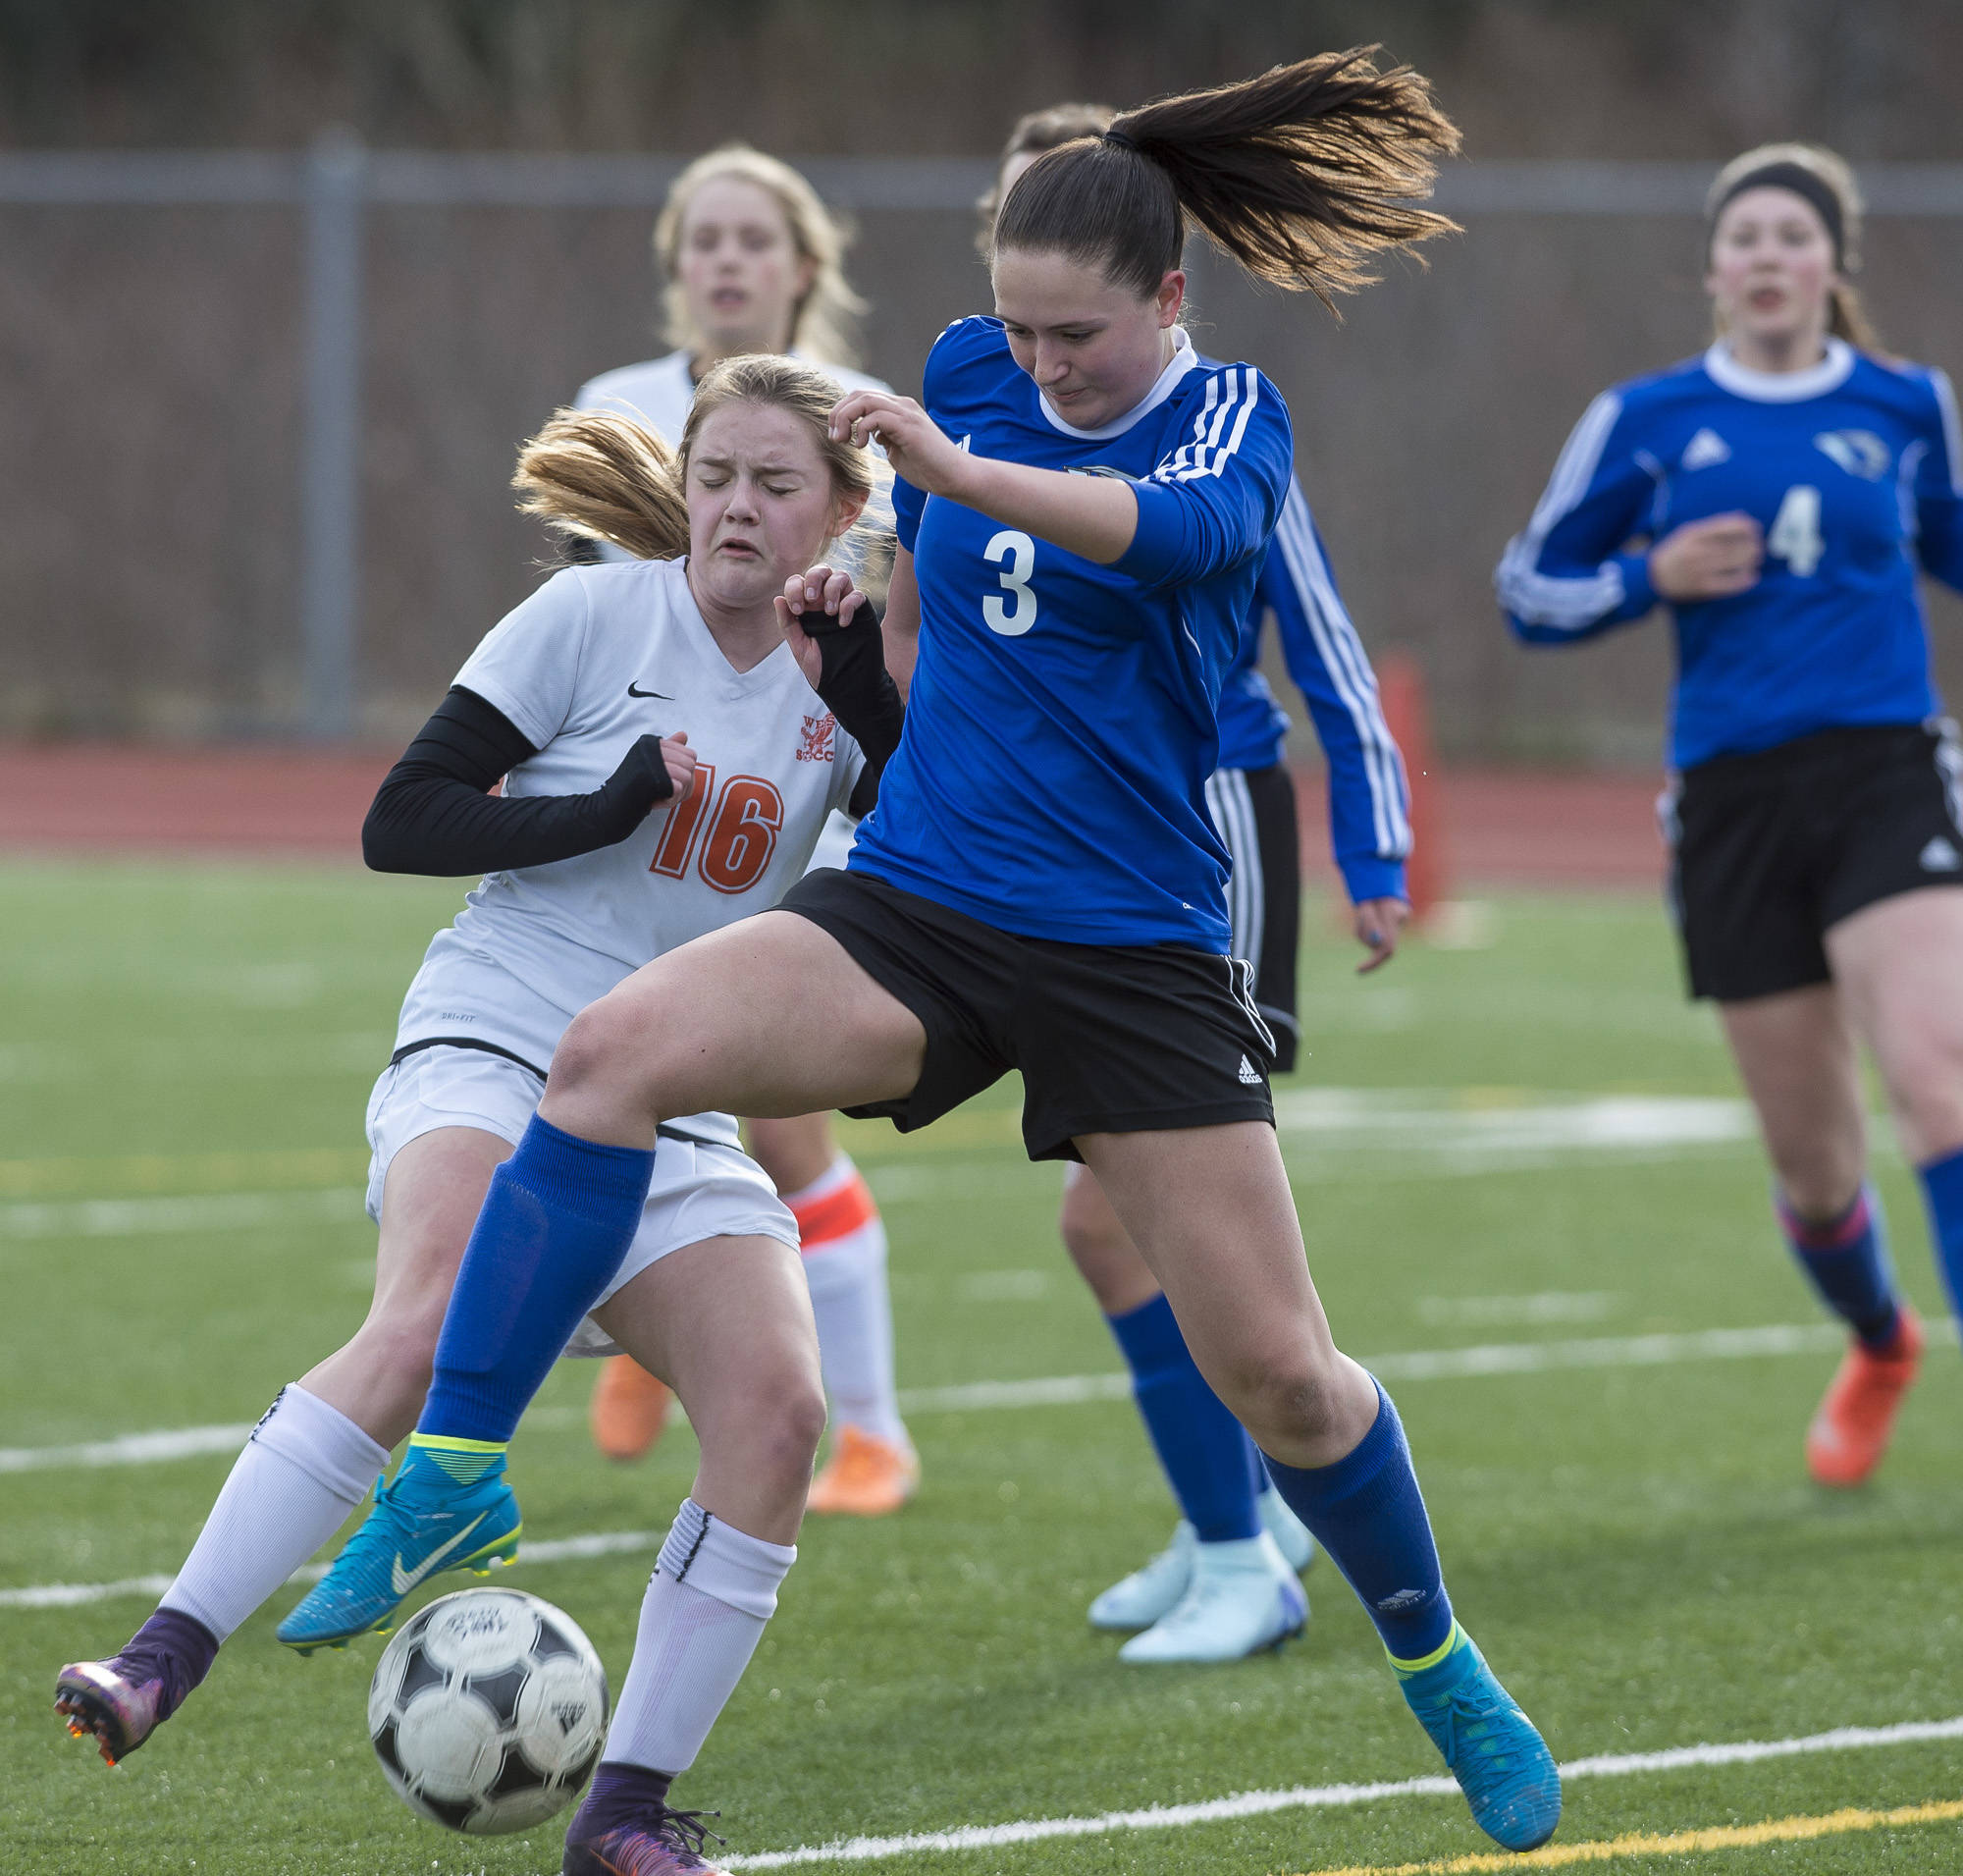 Thunder Mountain’s Macey Fuette, right, takes the ball from West’s Julia Johnson at TMHS on Friday. (Michael Penn | Juneau Empire)